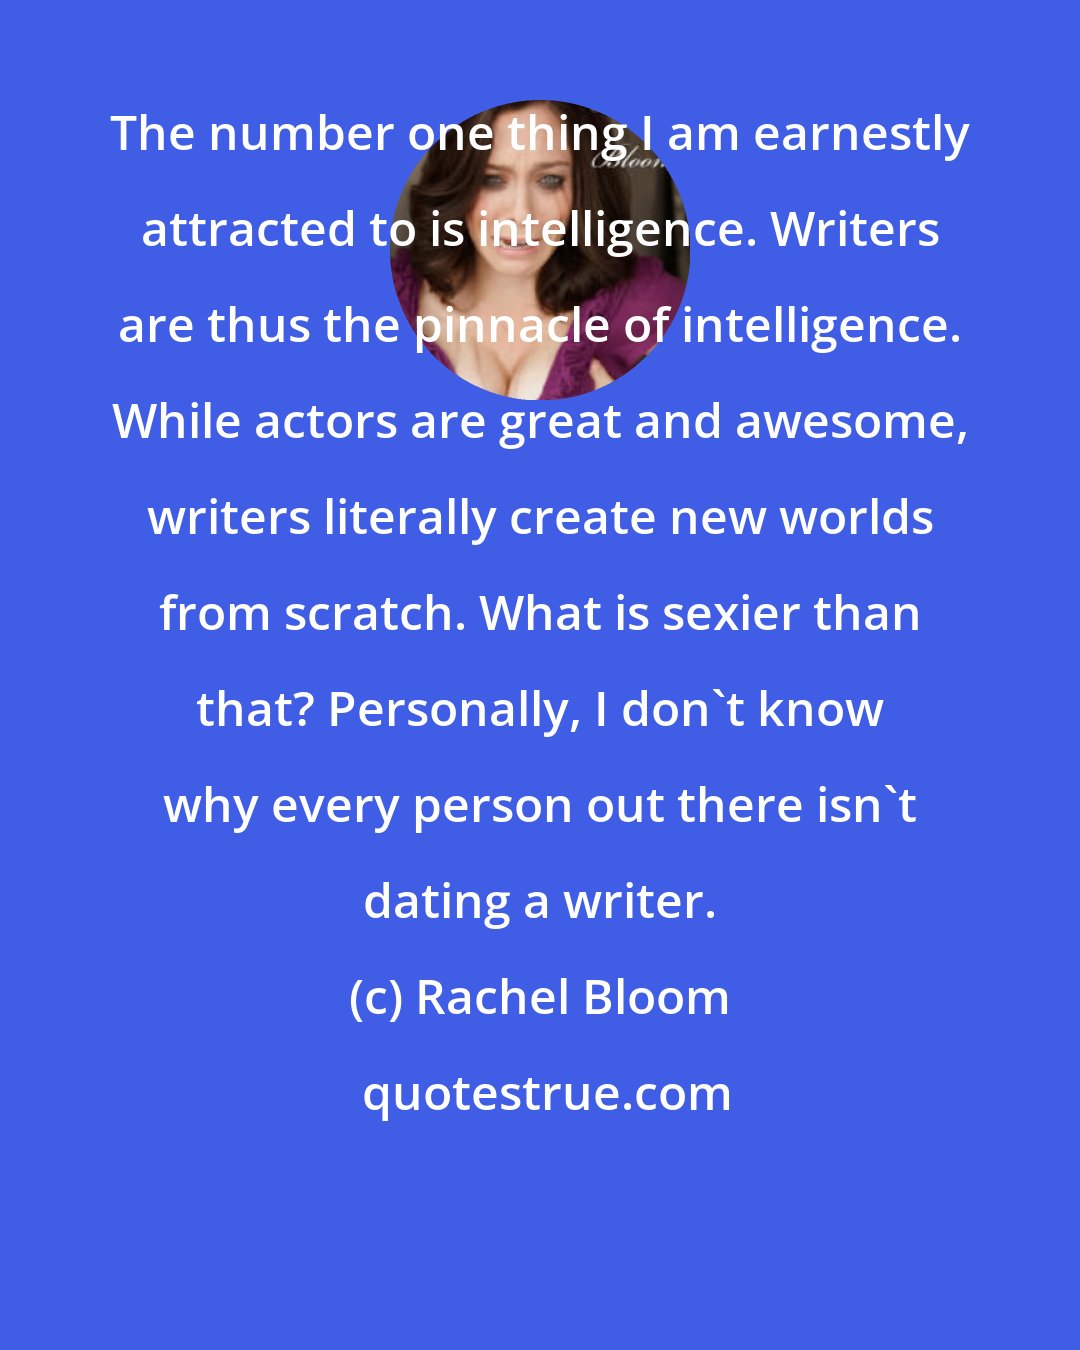 Rachel Bloom: The number one thing I am earnestly attracted to is intelligence. Writers are thus the pinnacle of intelligence. While actors are great and awesome, writers literally create new worlds from scratch. What is sexier than that? Personally, I don't know why every person out there isn't dating a writer.